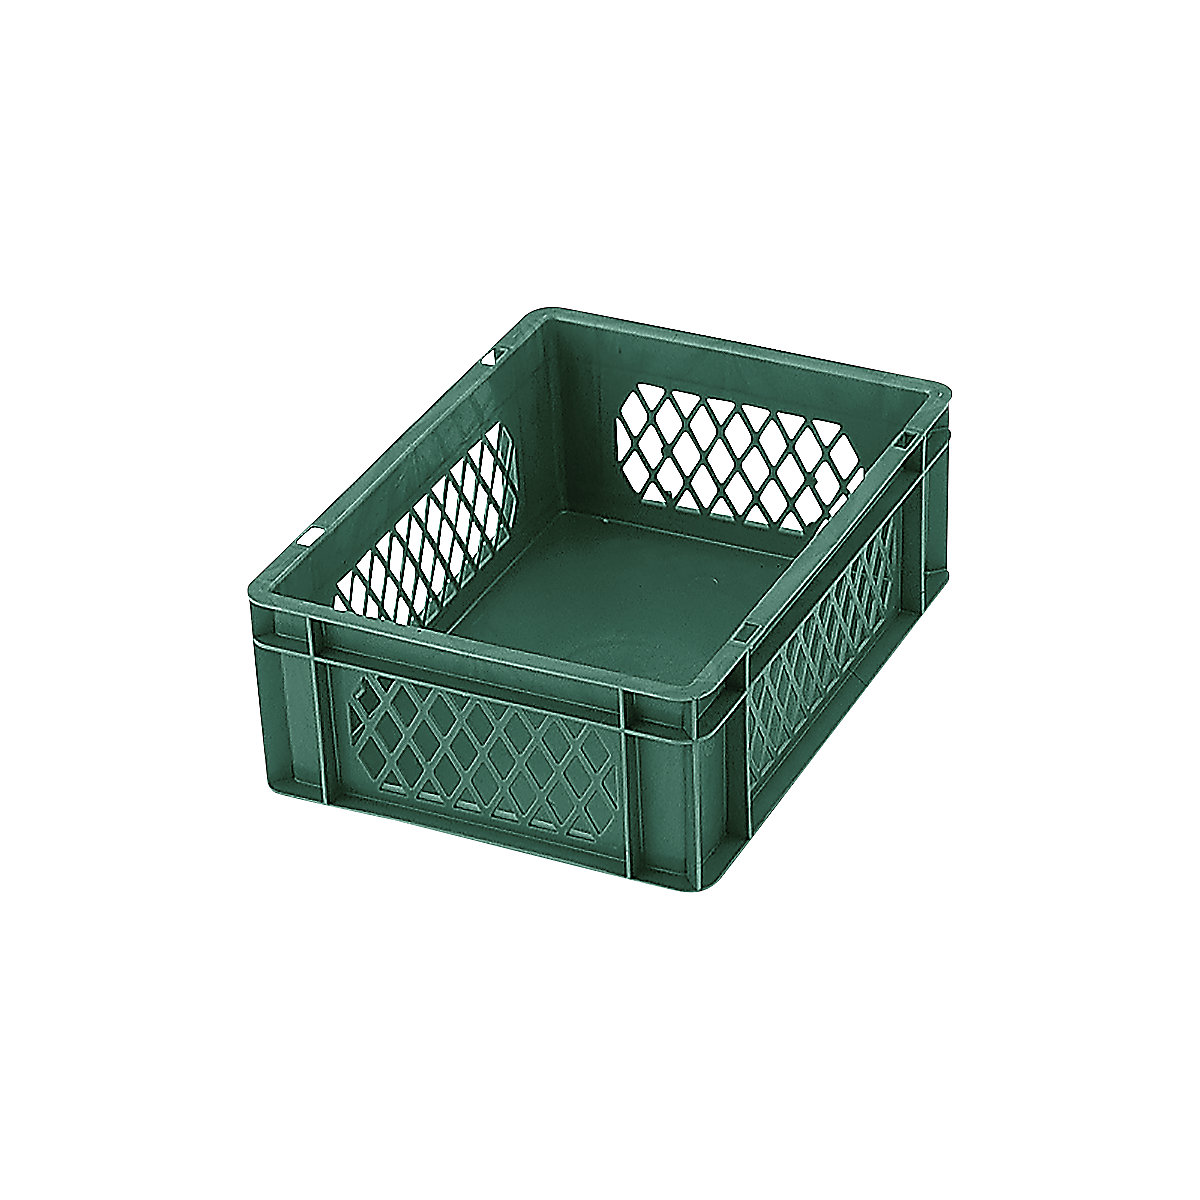 Euro stacking container, perforated walls, closed base, LxWxH 400 x 300 x 145 mm, green, pack of 5-6